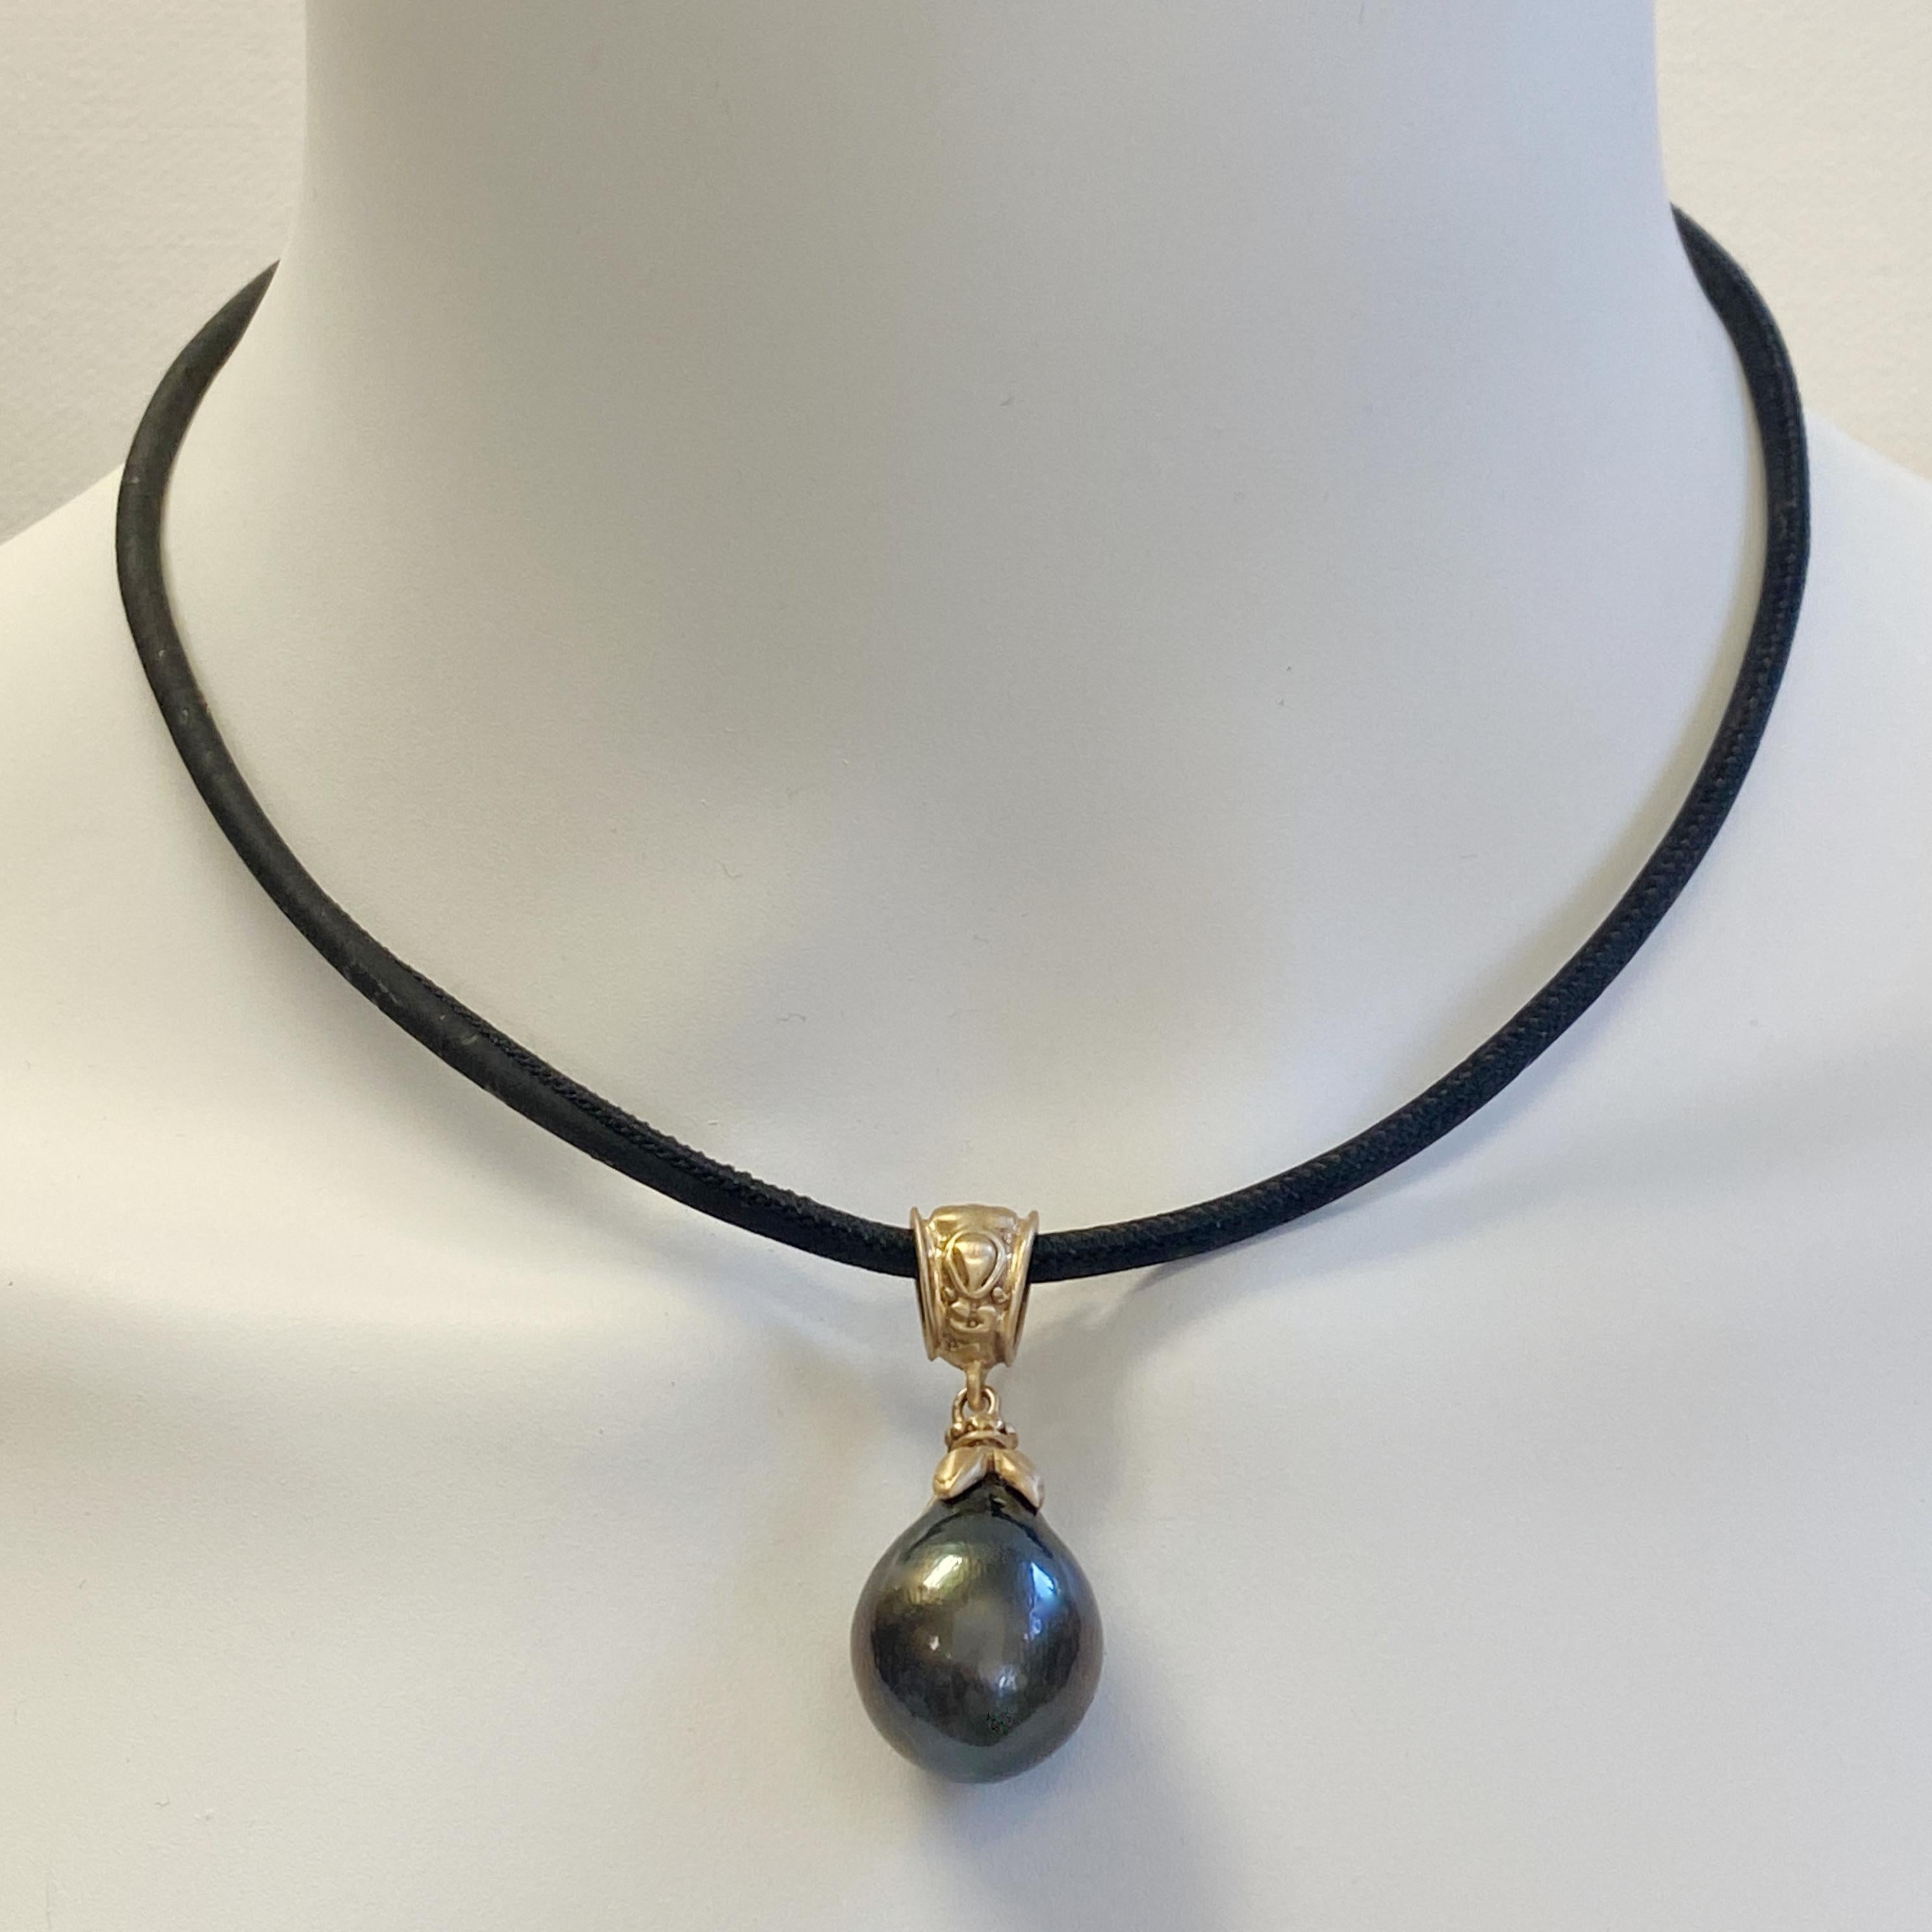 This enormous (over 15mm), dark and sultry, richly hued black pearl is set in a Byzantine-flavored, satiny 18 karat yellow gold pedant handmade in our shop by Eytan Brandes.    

Our pearl dealer, who specializes in jumbo South Sea white and black